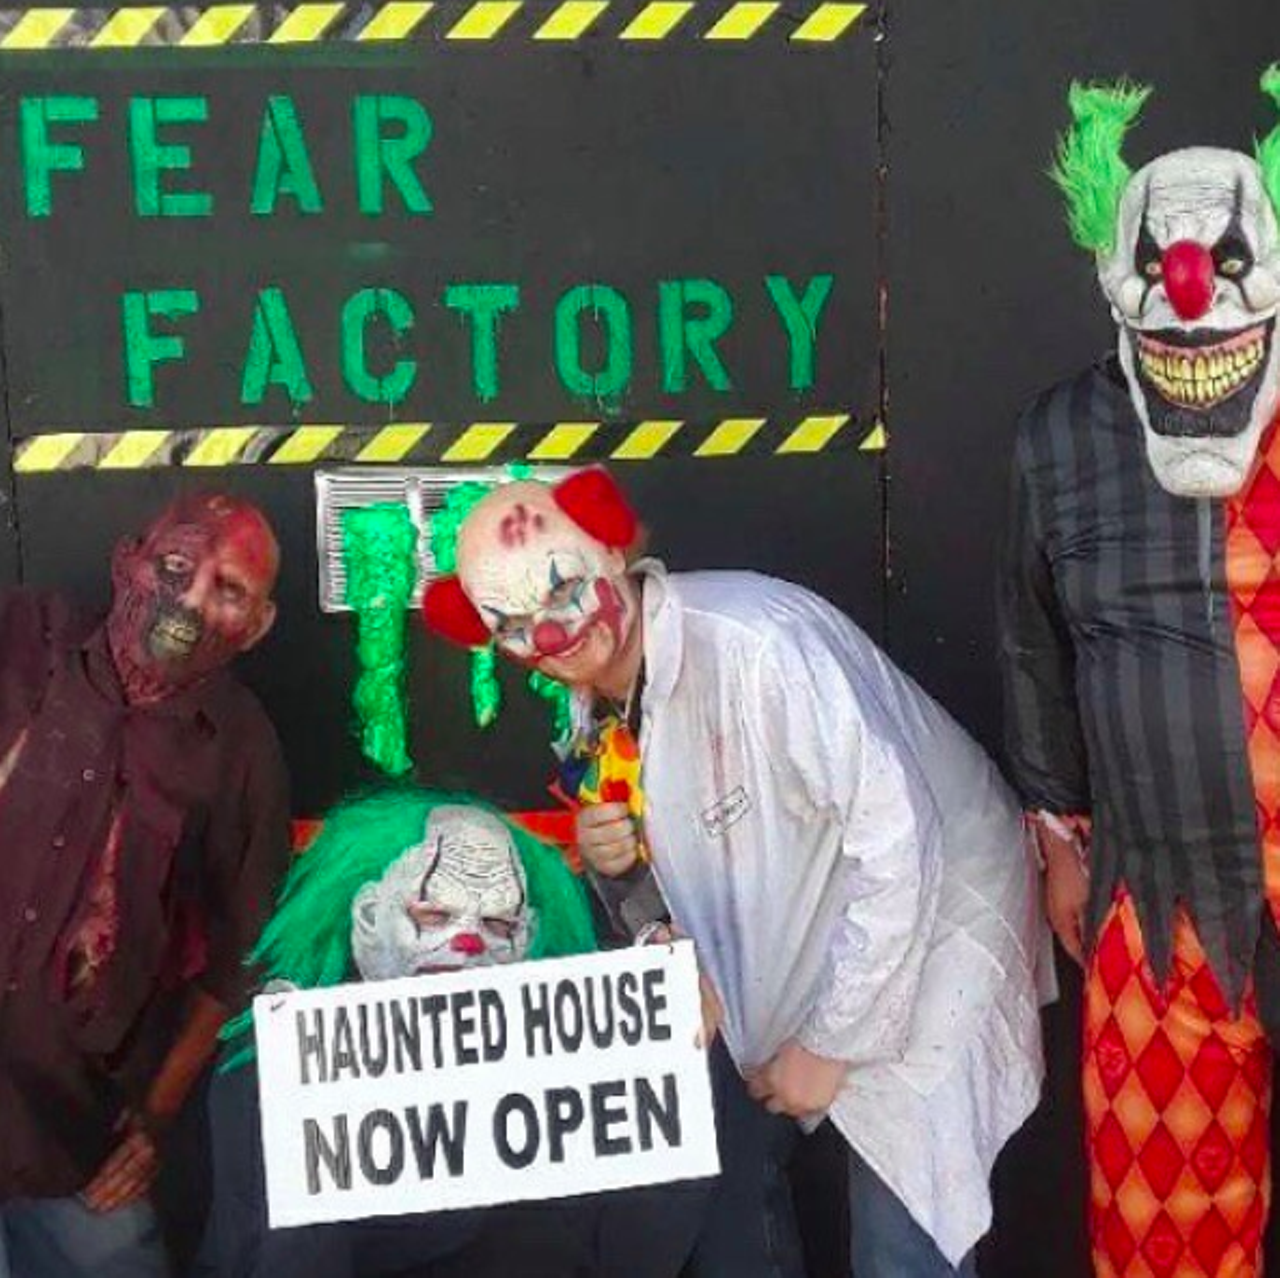 The Fear Factory Haunted Experience
9333 SW Loop 410, (210) 623-8383, tradersvillage.com
Make your way over to Traders Village to find some good deals. Oh, and to check out this free (with parking admission) haunted ~experience~. Open weekends in October, this twisted maze of frights is perfect for the family with parades going on too.
Photo via Instagram, tradersvillage